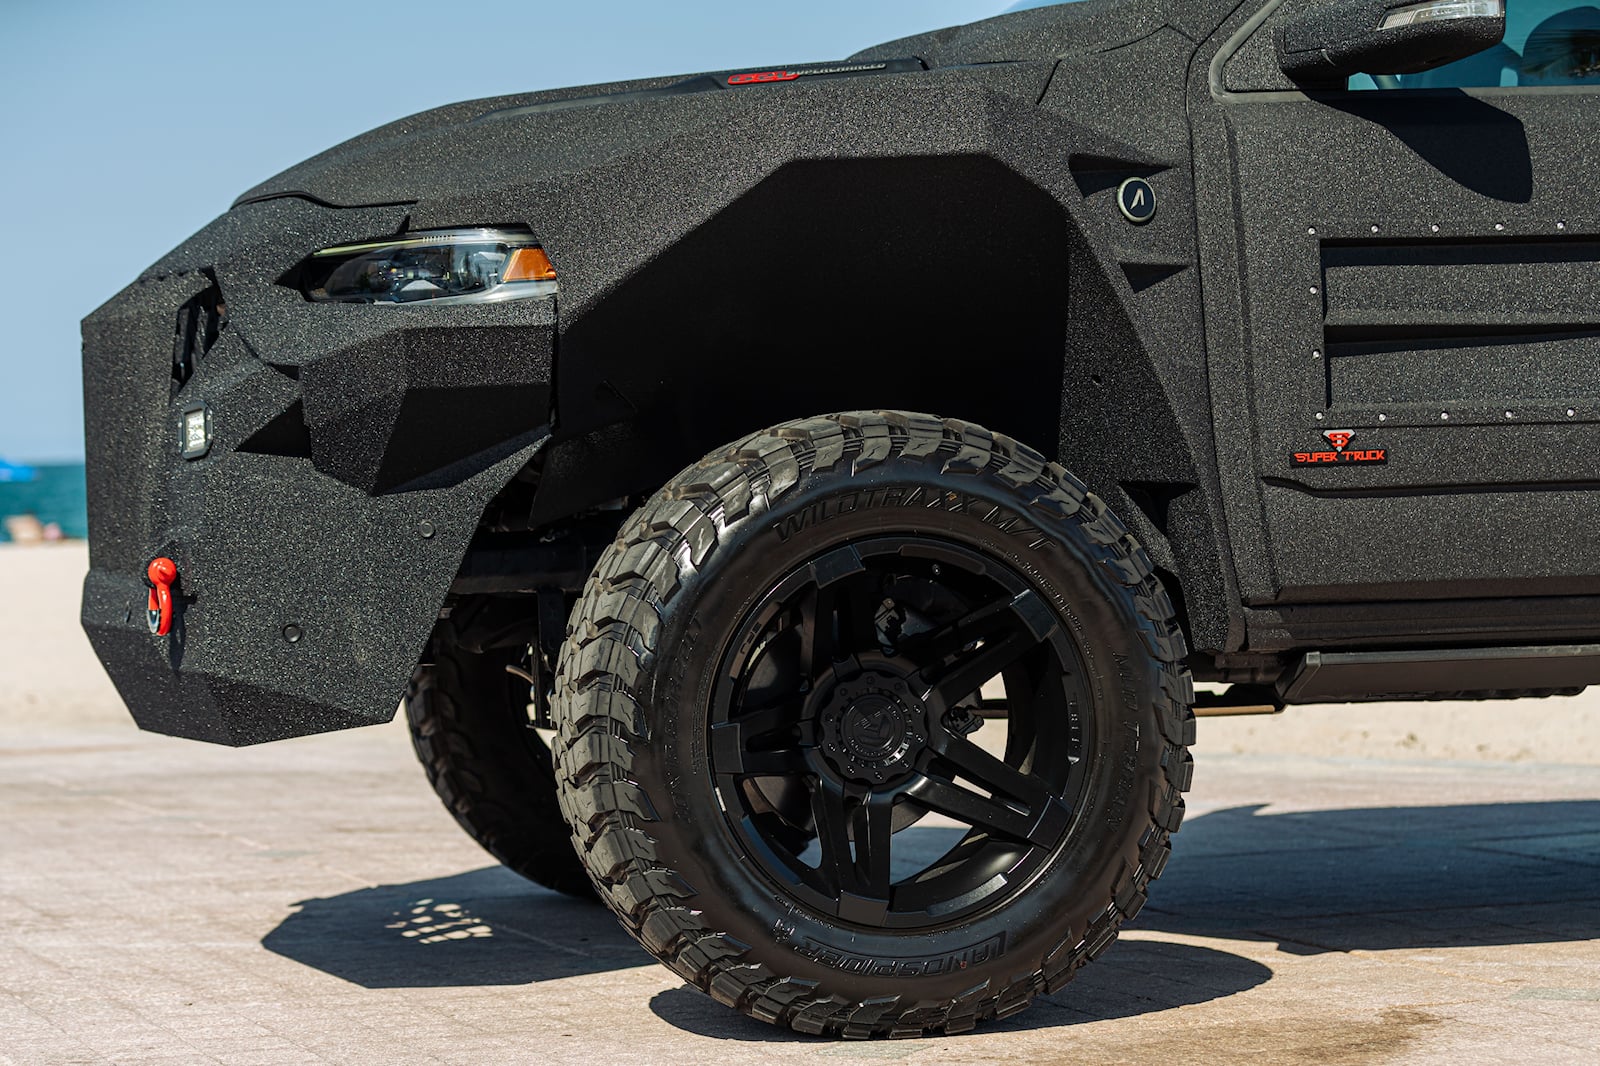 Apocalypse Super Truck 4x4 Is A Ram 1500 On Steroids